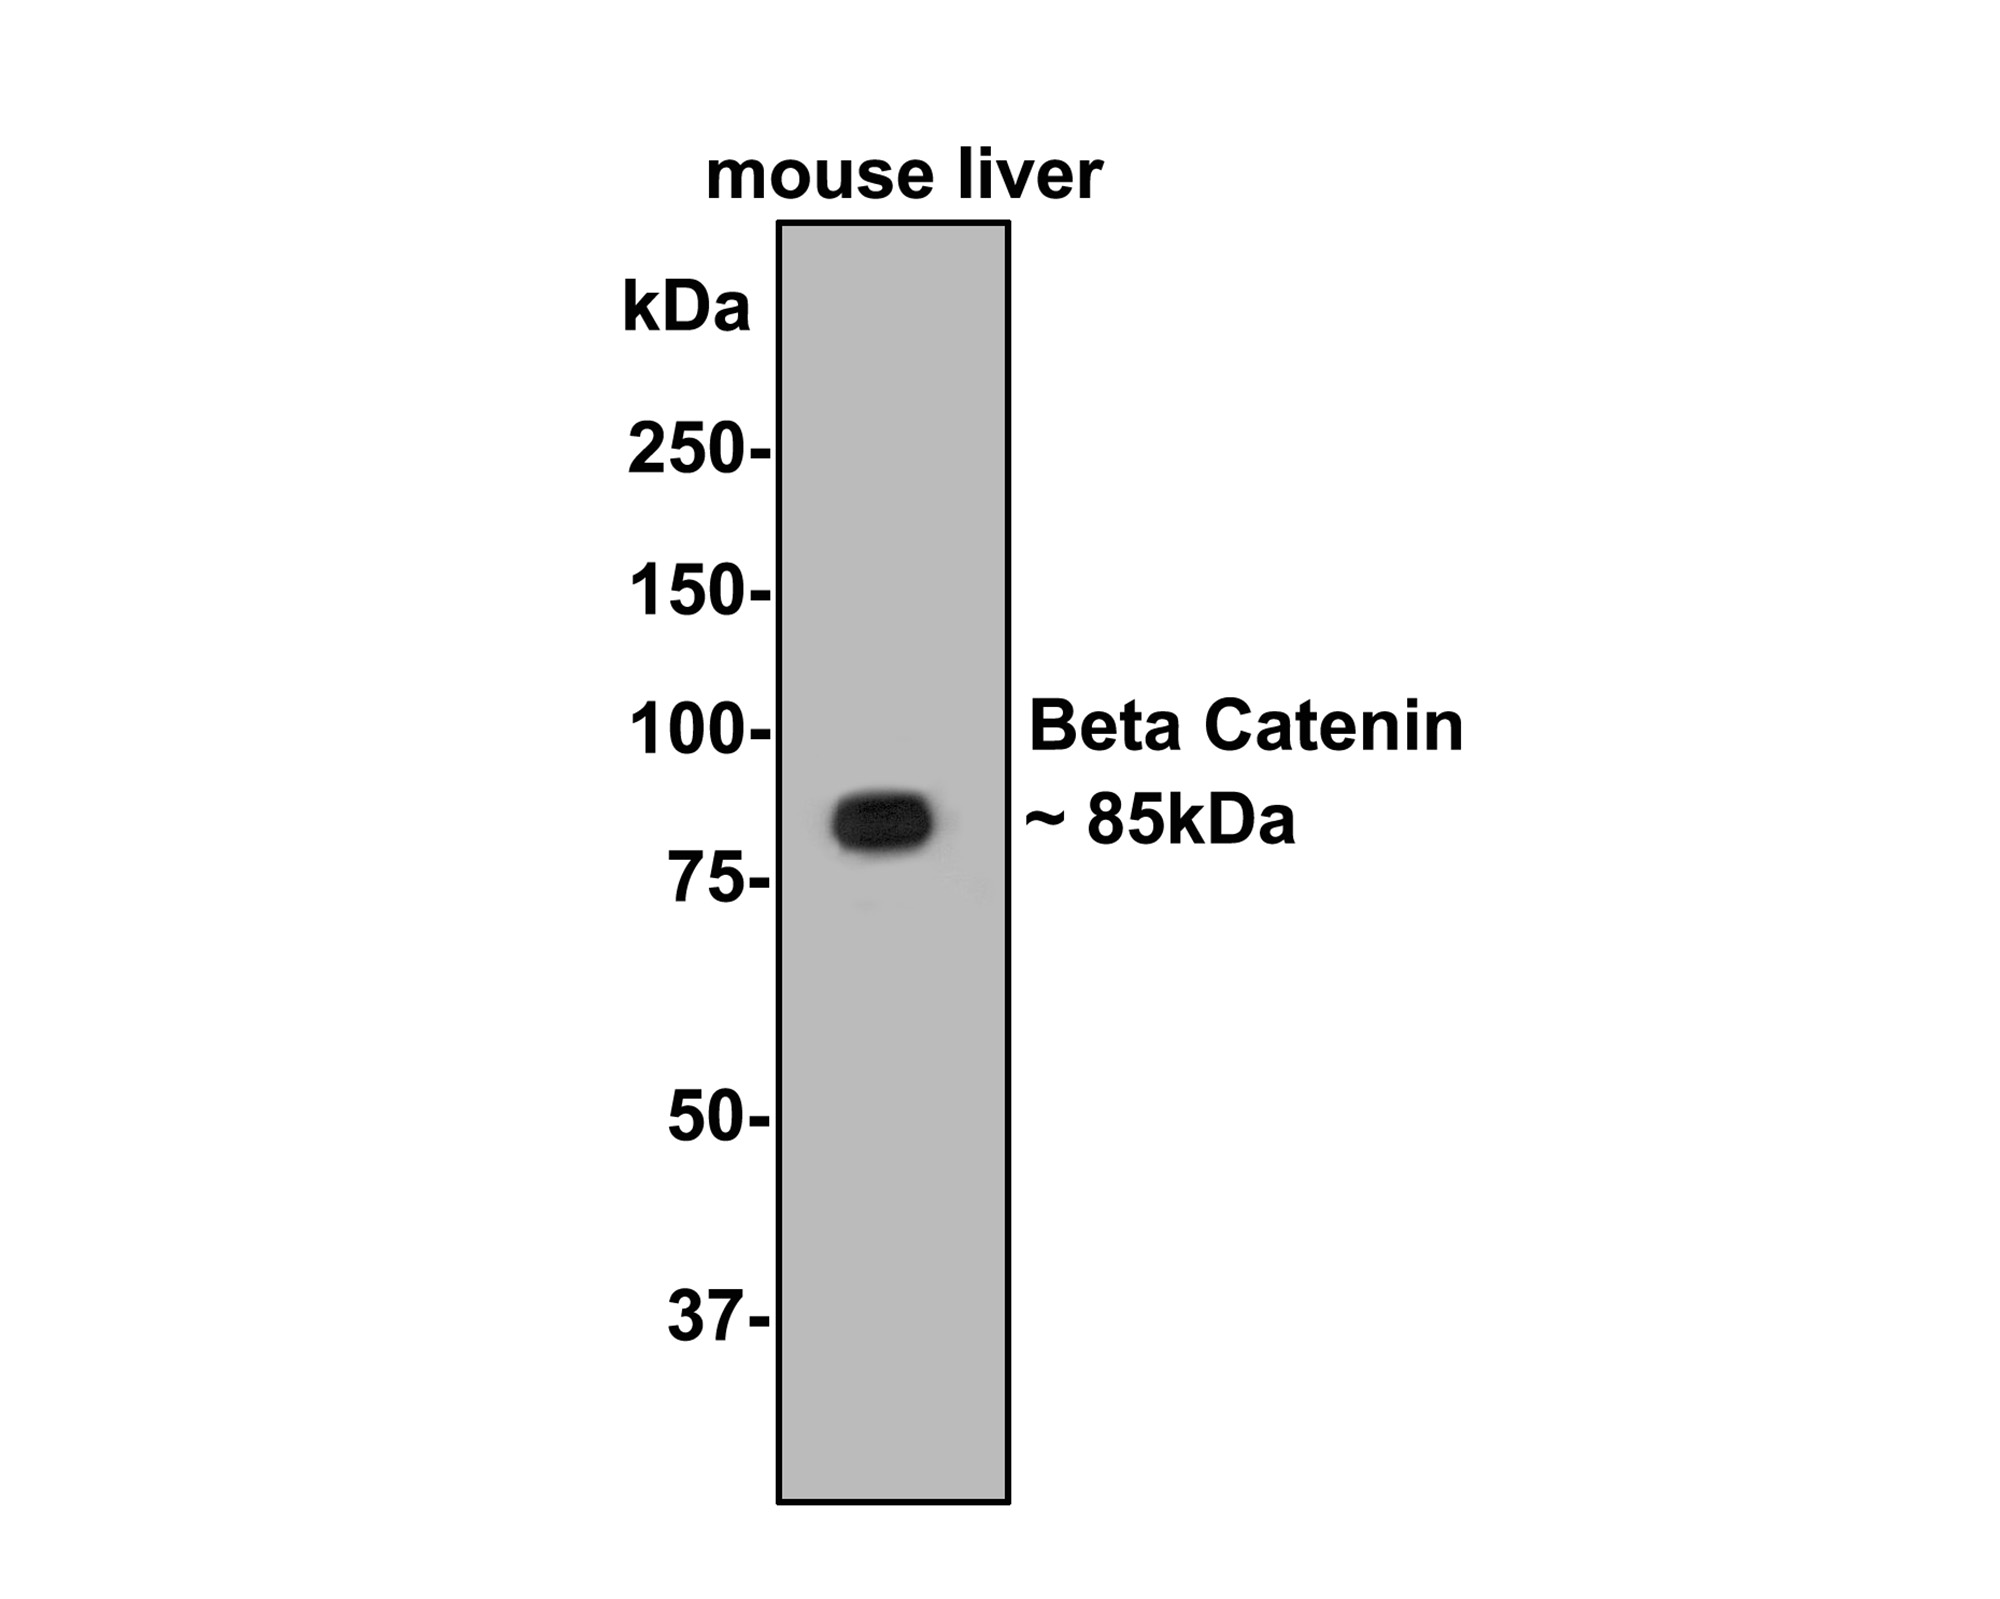 Western blot analysis of Beta Catenin on mouse liver tissue lysates with Rabbit anti-Beta Catenin antibody (0407-16) at 1/500 dilution.<br />
<br />
Lysates/proteins at 10 µg/Lane.<br />
<br />
Predicted band size: 85 kDa<br />
Observed band size: 85 kDa<br />
<br />
Exposure time: 30 seconds;<br />
<br />
8% SDS-PAGE gel.<br />
<br />
Proteins were transferred to a PVDF membrane and blocked with 5% NFDM/TBST for 1 hour at room temperature. The primary antibody (0407-16) at 1/500 dilution was used in 5% NFDM/TBST at room temperature for 2 hours. Goat Anti-Rabbit IgG - HRP Secondary Antibody (HA1001) at 1:40,000 dilution was used for 1 hour at room temperature.